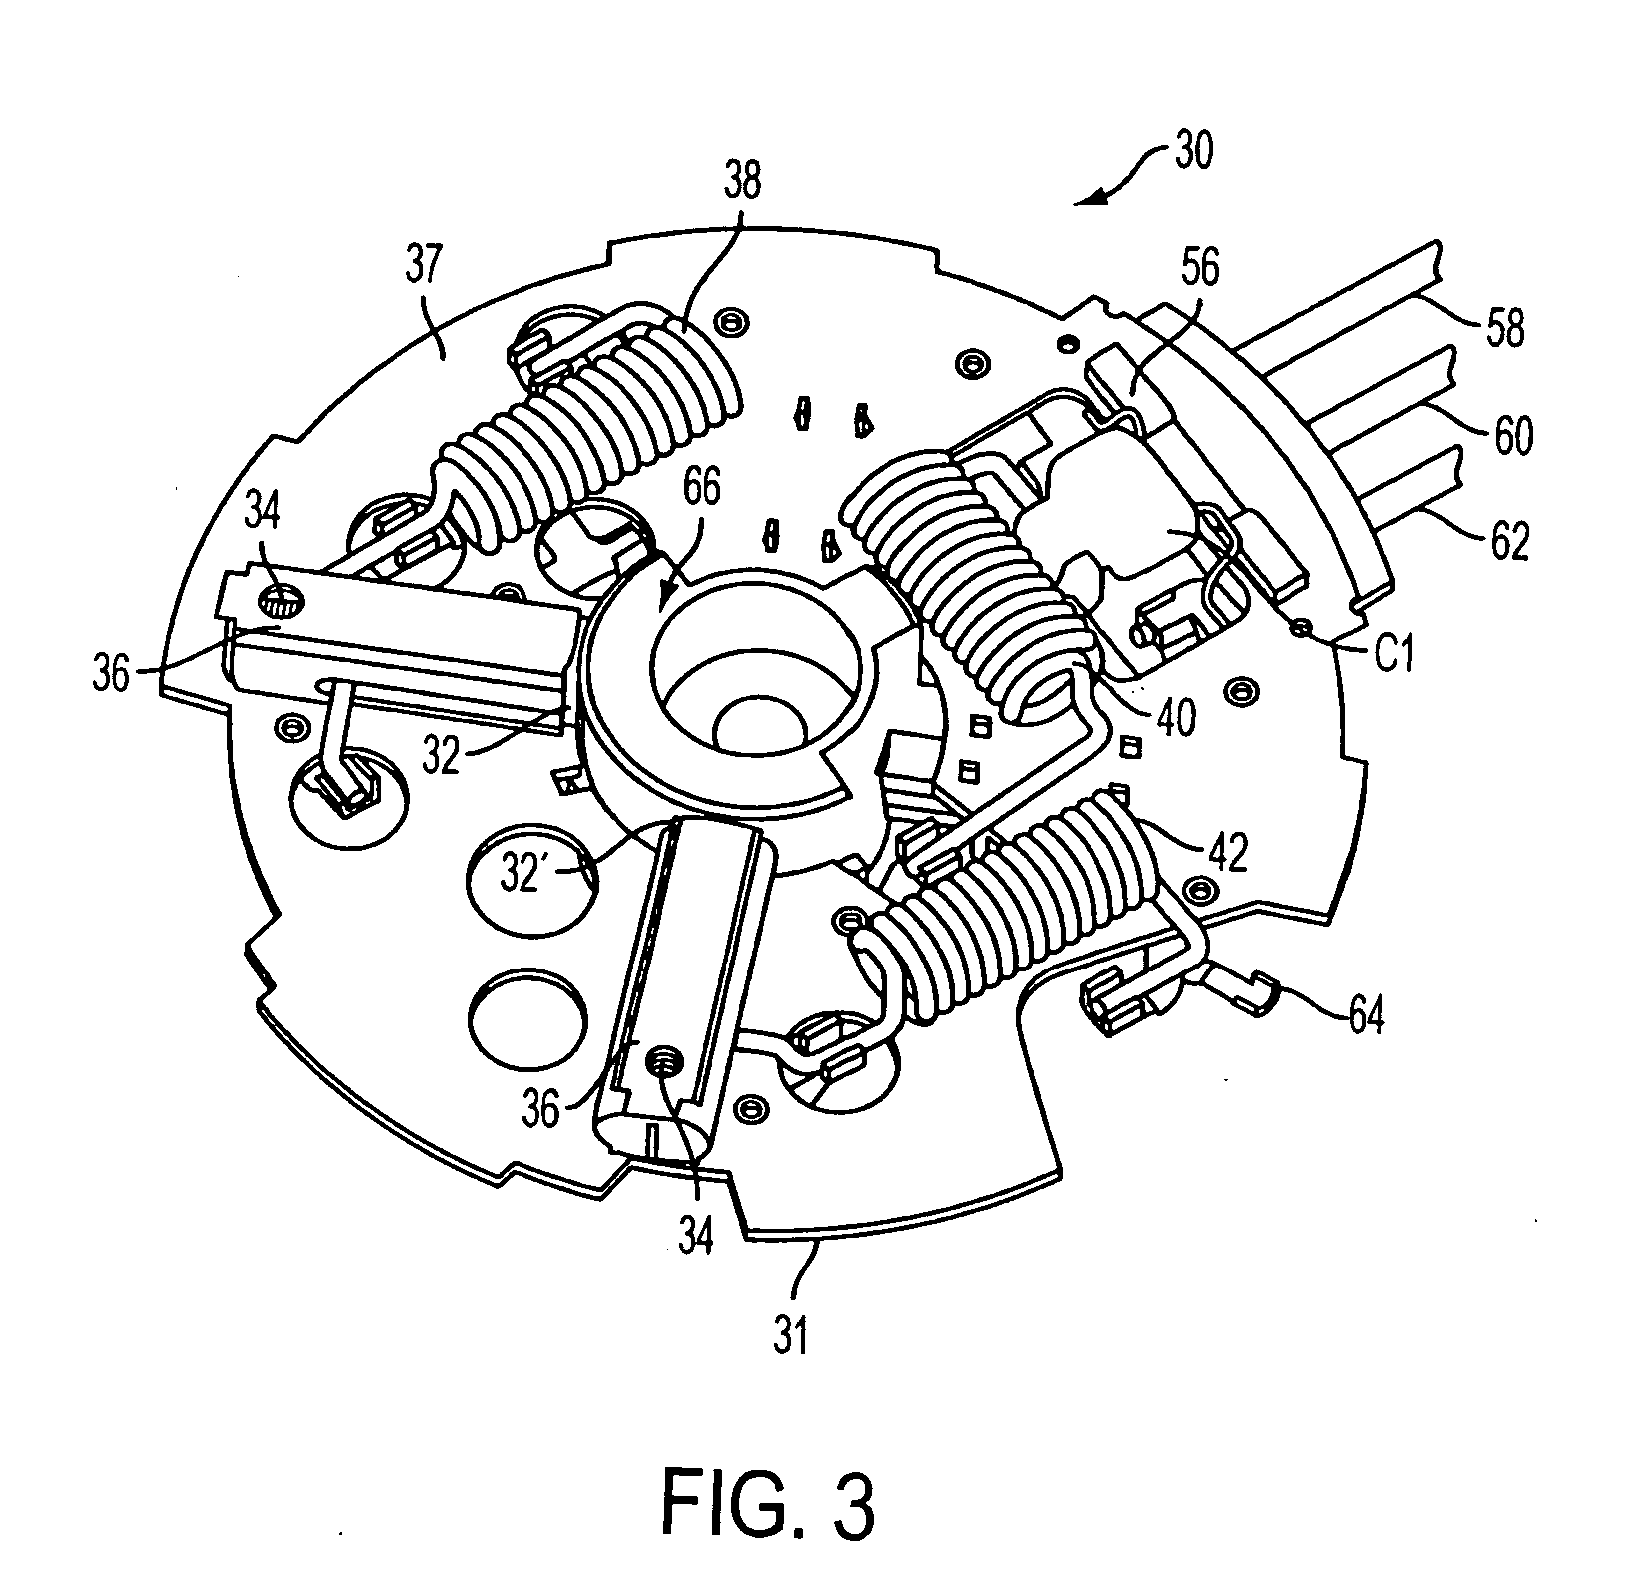 Brush card assembly with RFI suppression for two or three speed permanent magnet brush motor with link wound dual commutator and dual armature winding configuration